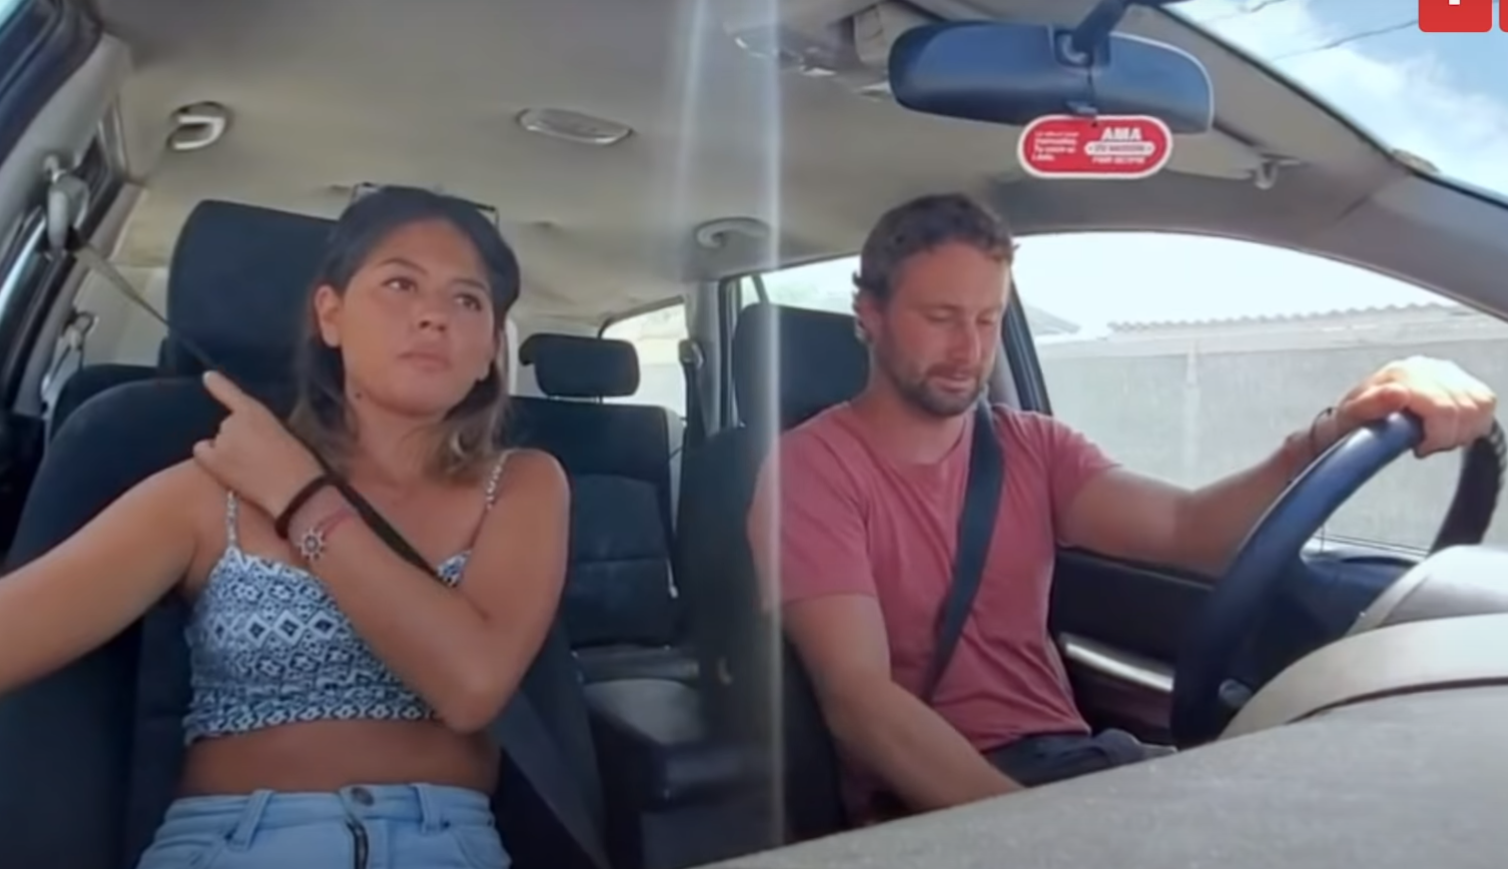 90 Day Fiancé couple Corey and Evelin together in the car, Corey Rathgeber is driving